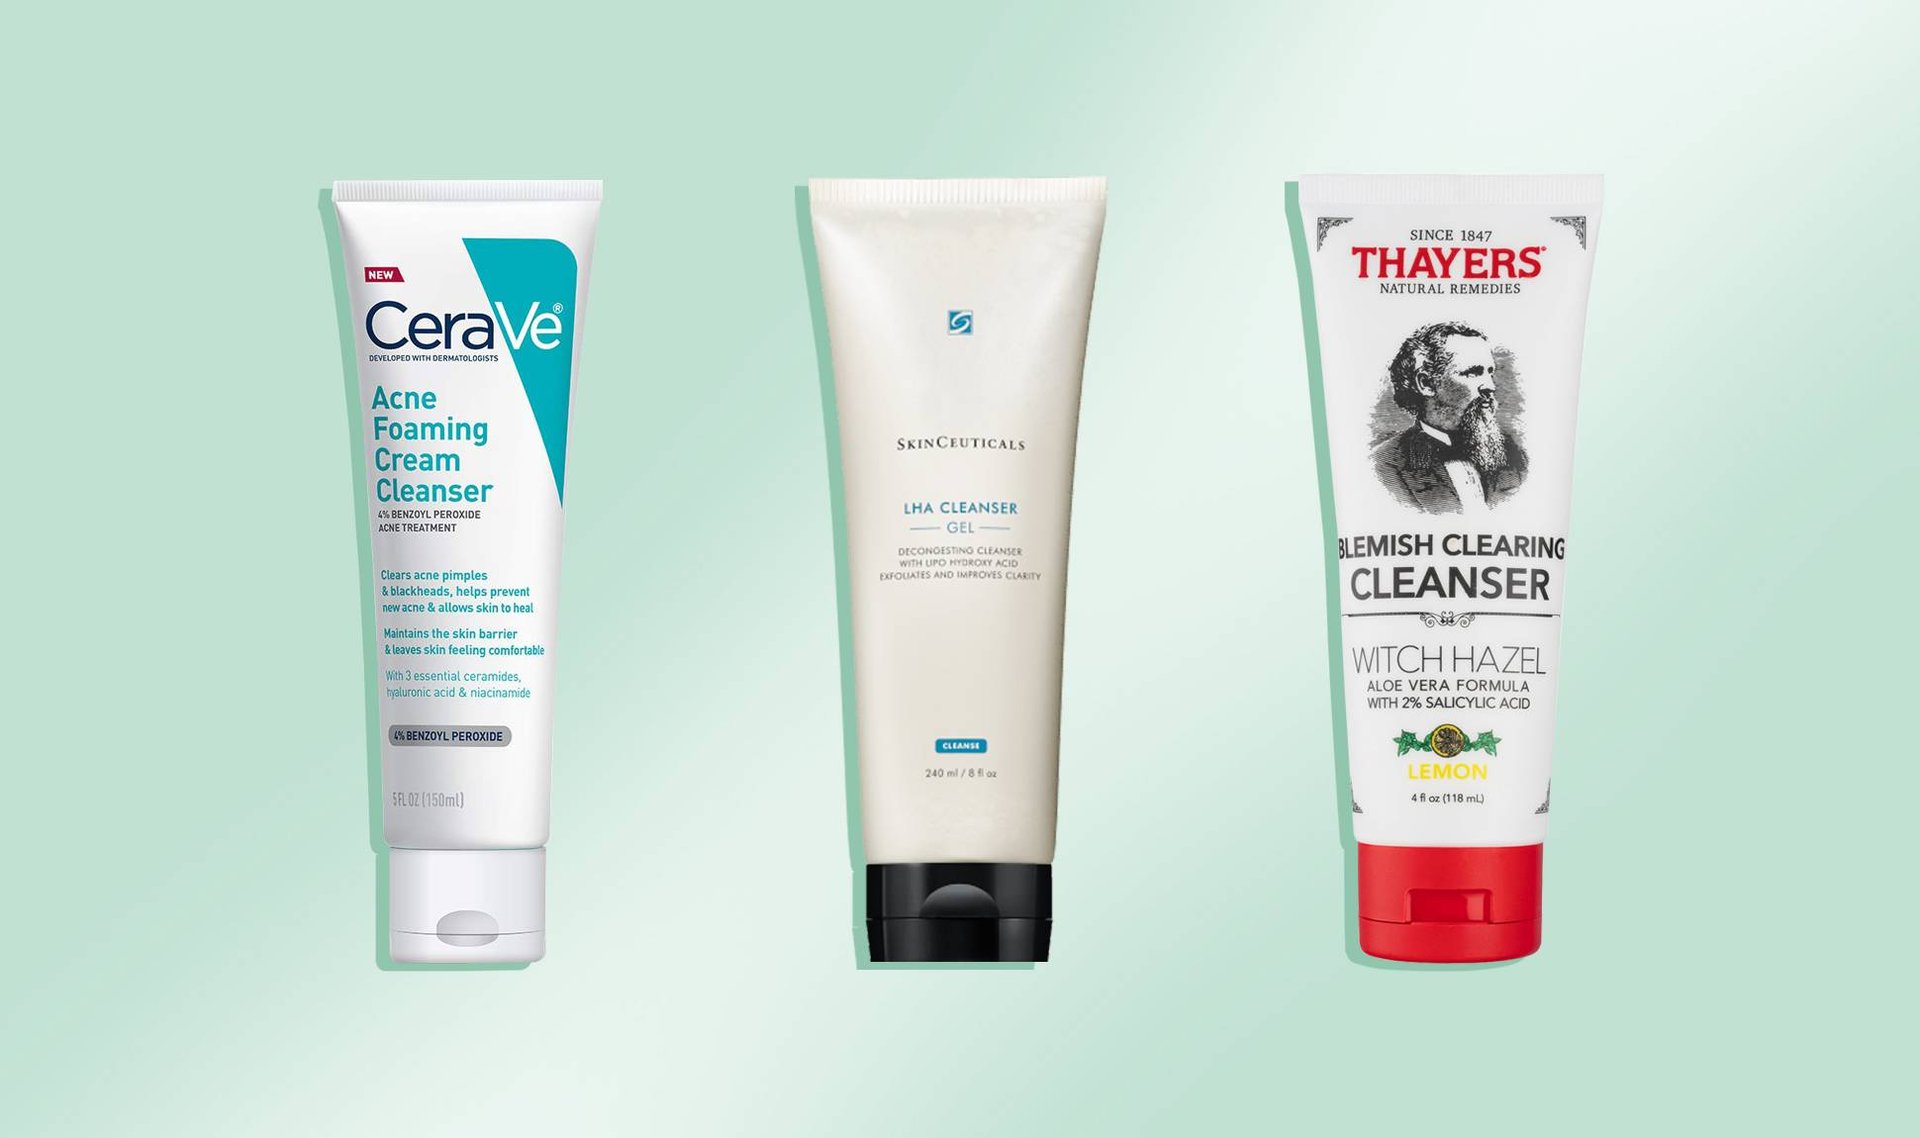 7 Cleansers to Try if You Have Oily, Acne-Prone Skin